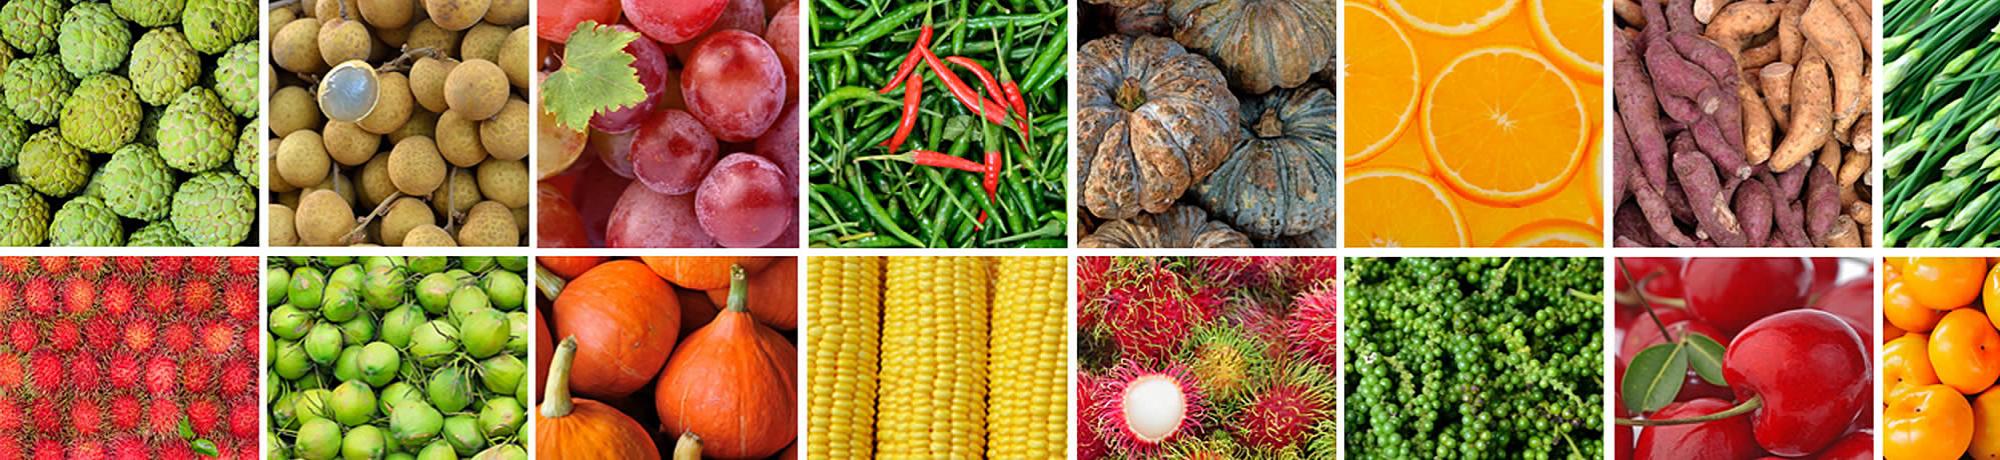 Array of fruits and vegetables